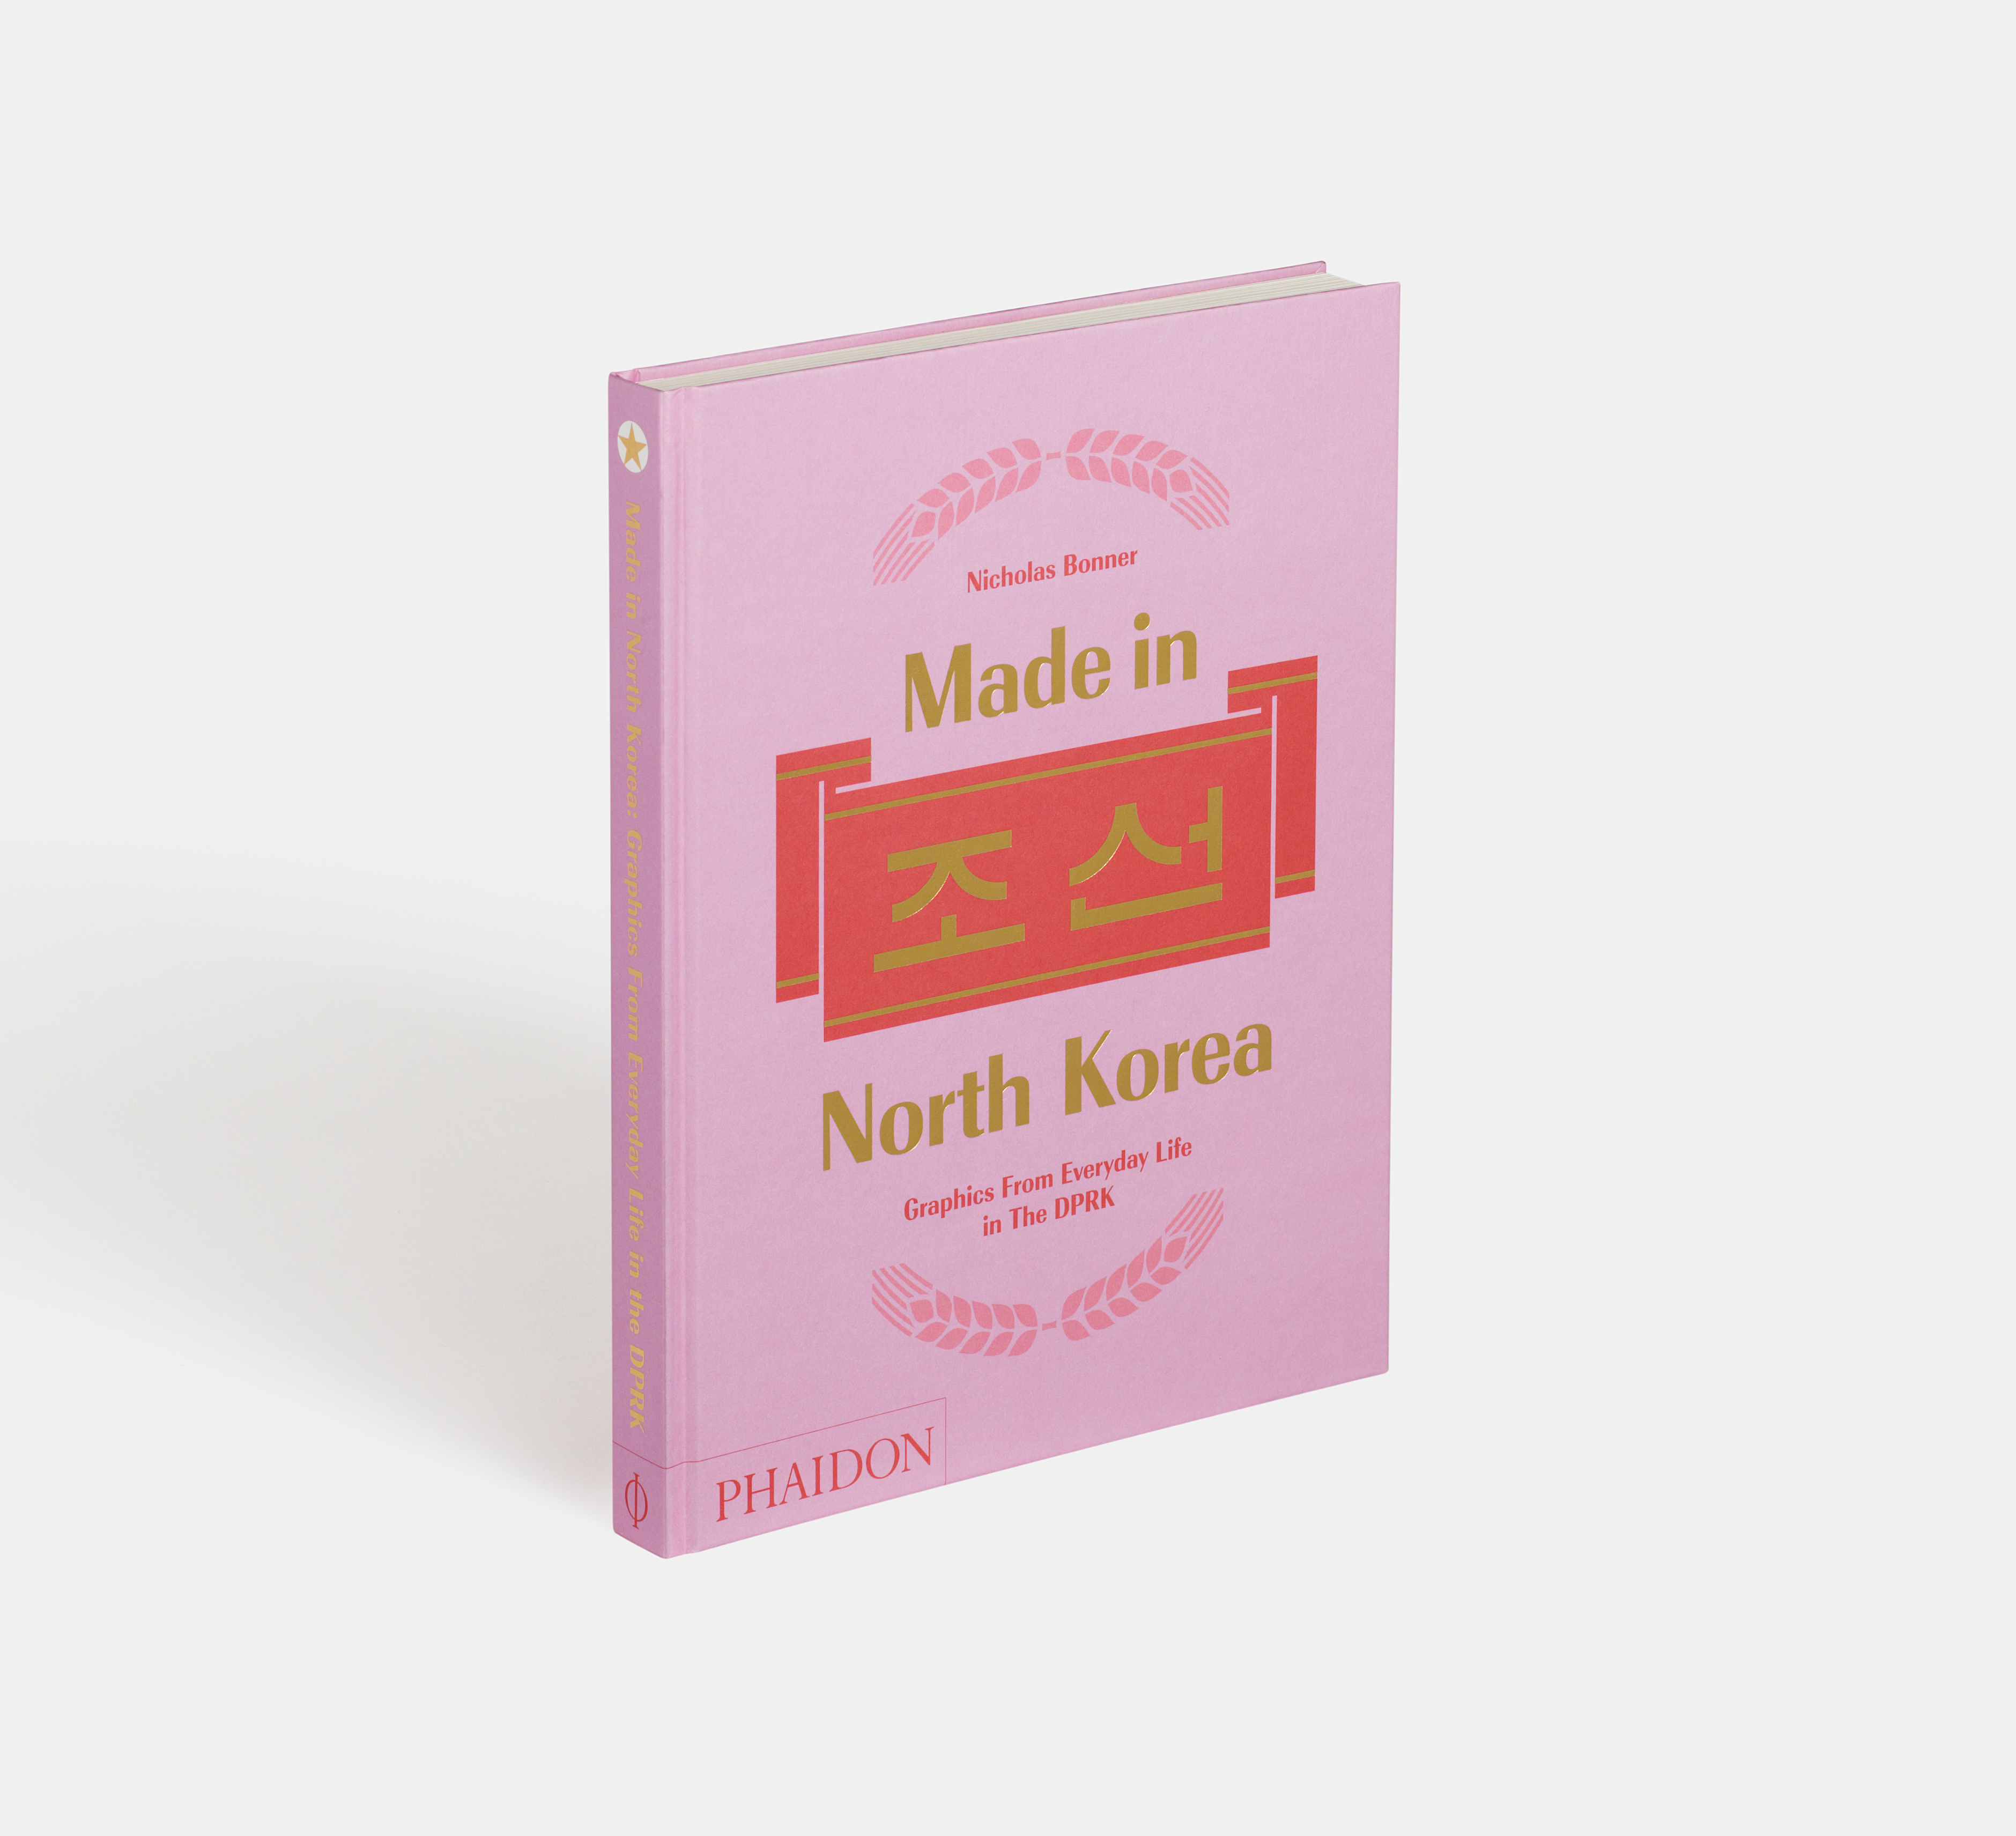 Made in North Korea is available on Artspace for $39